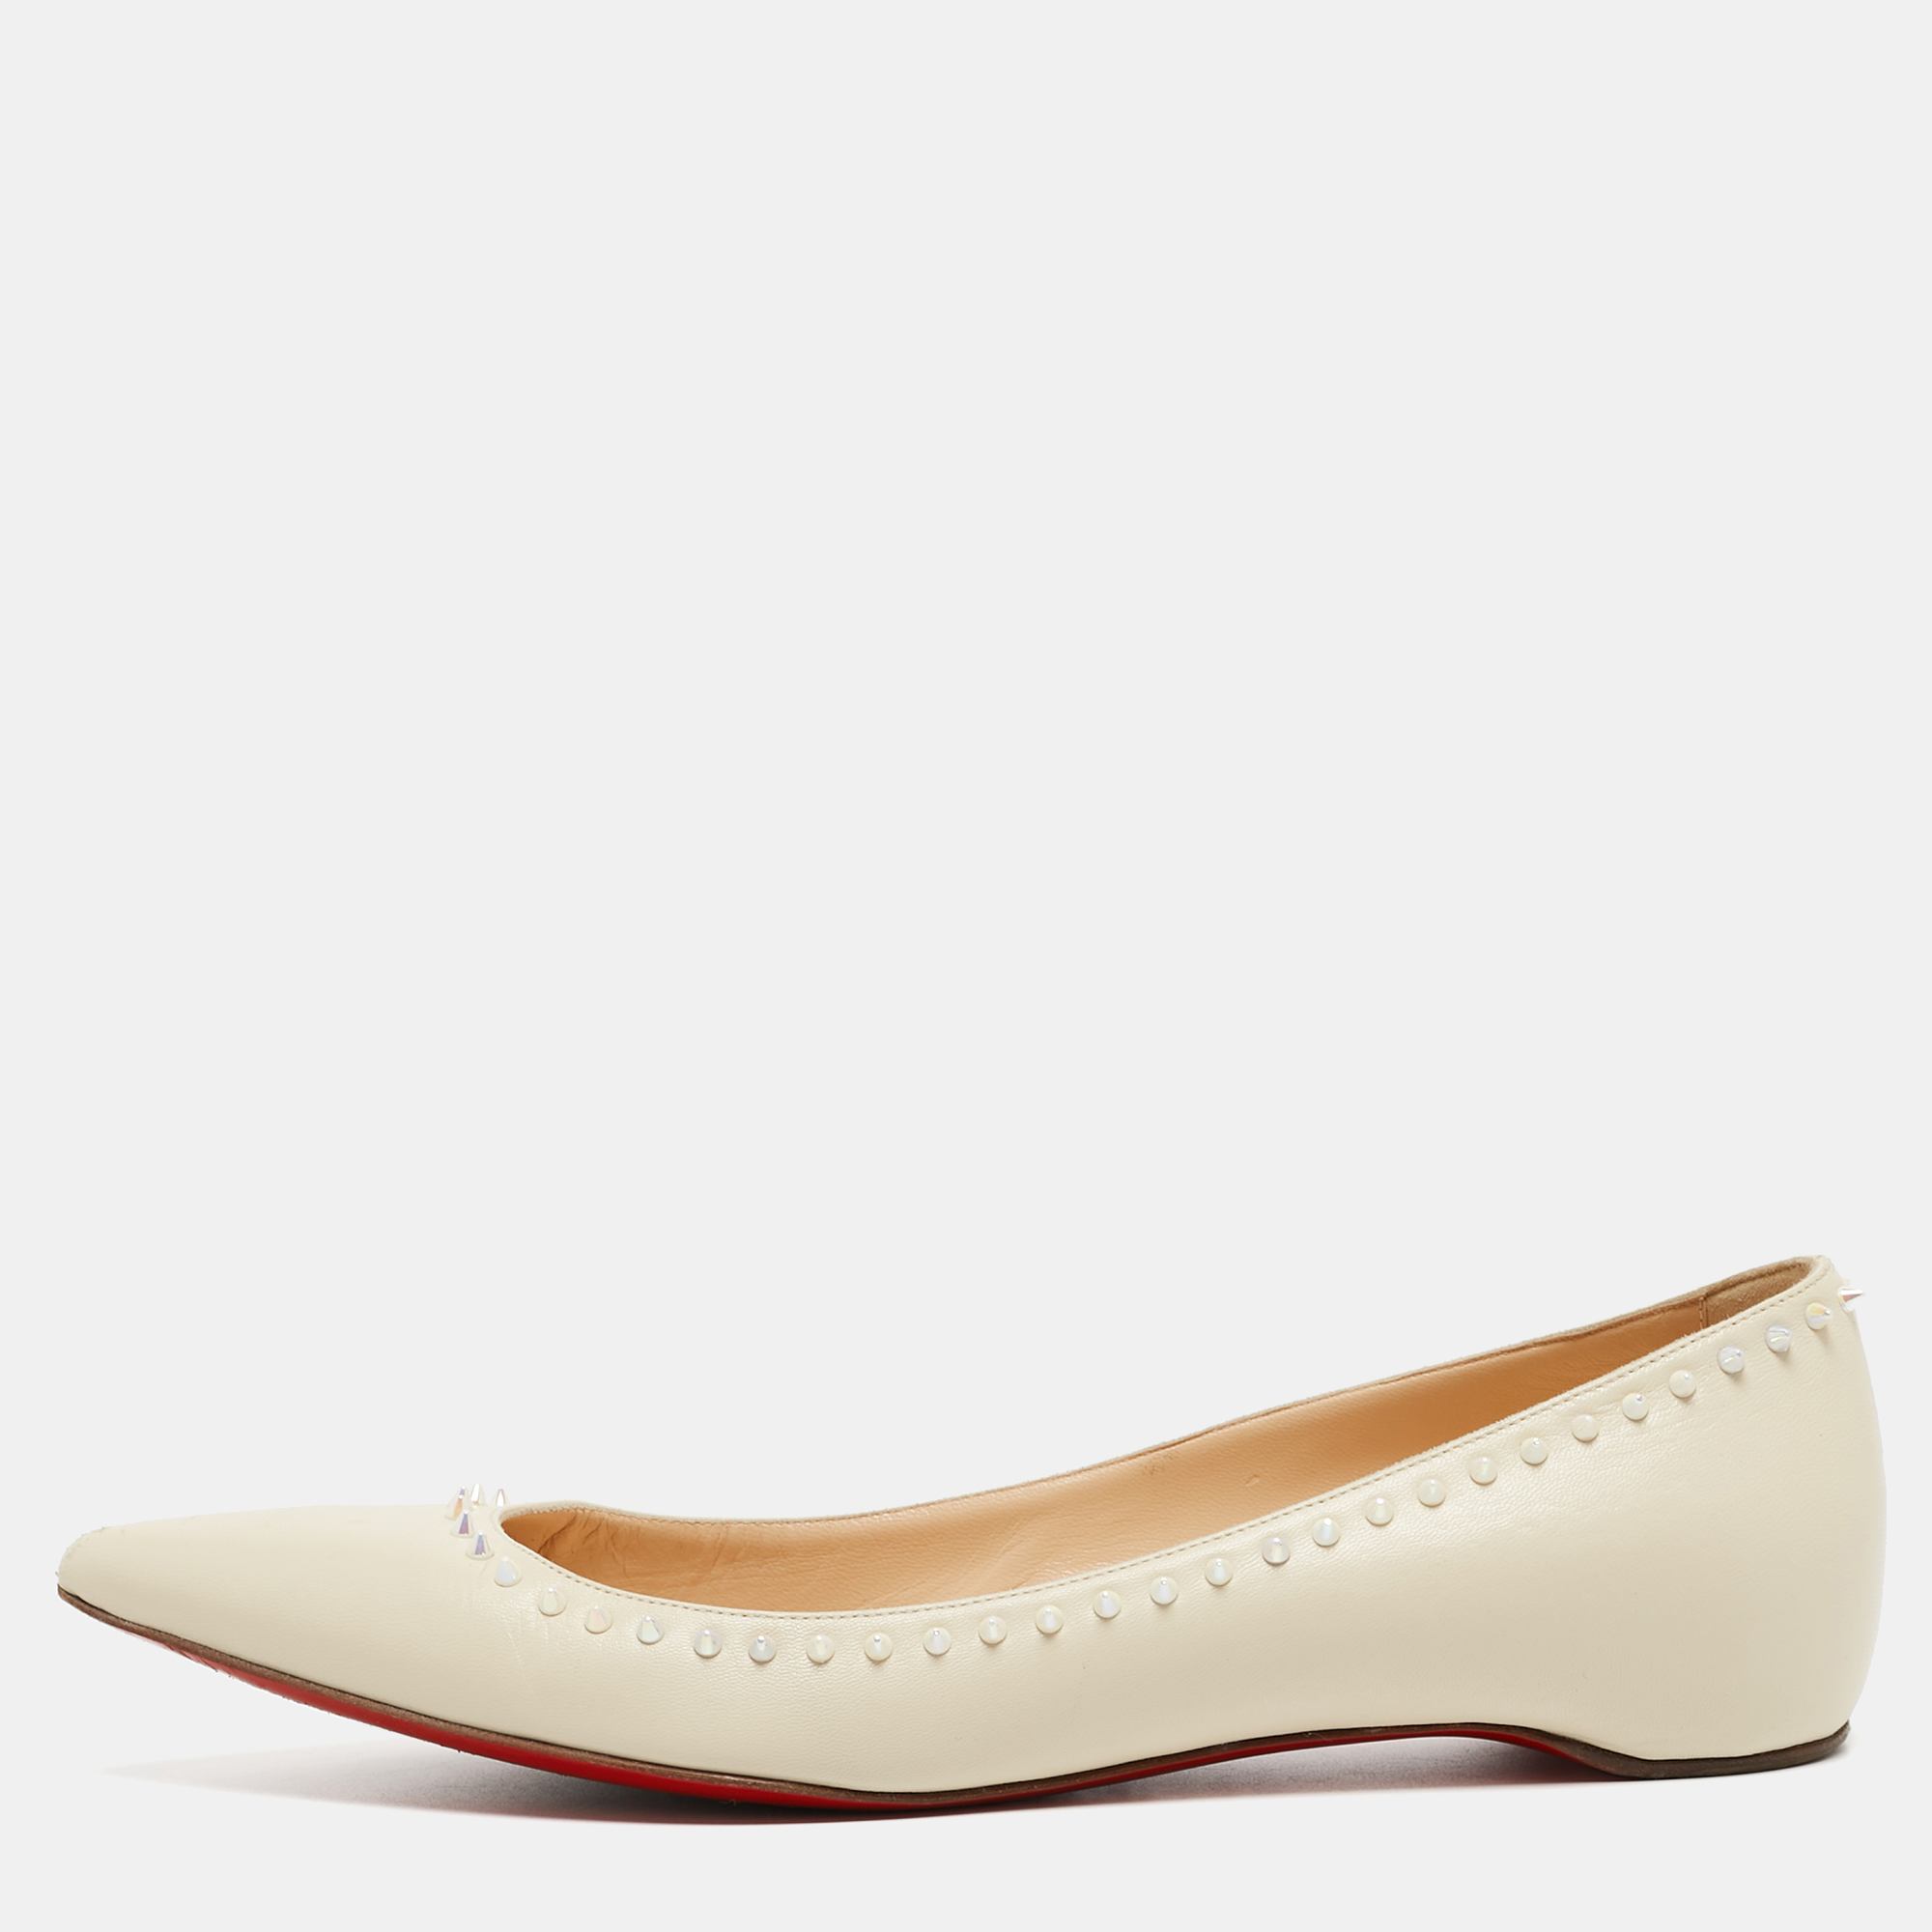 Pre-owned Christian Louboutin Cream Leather Anjalina Ballet Flats Size 39